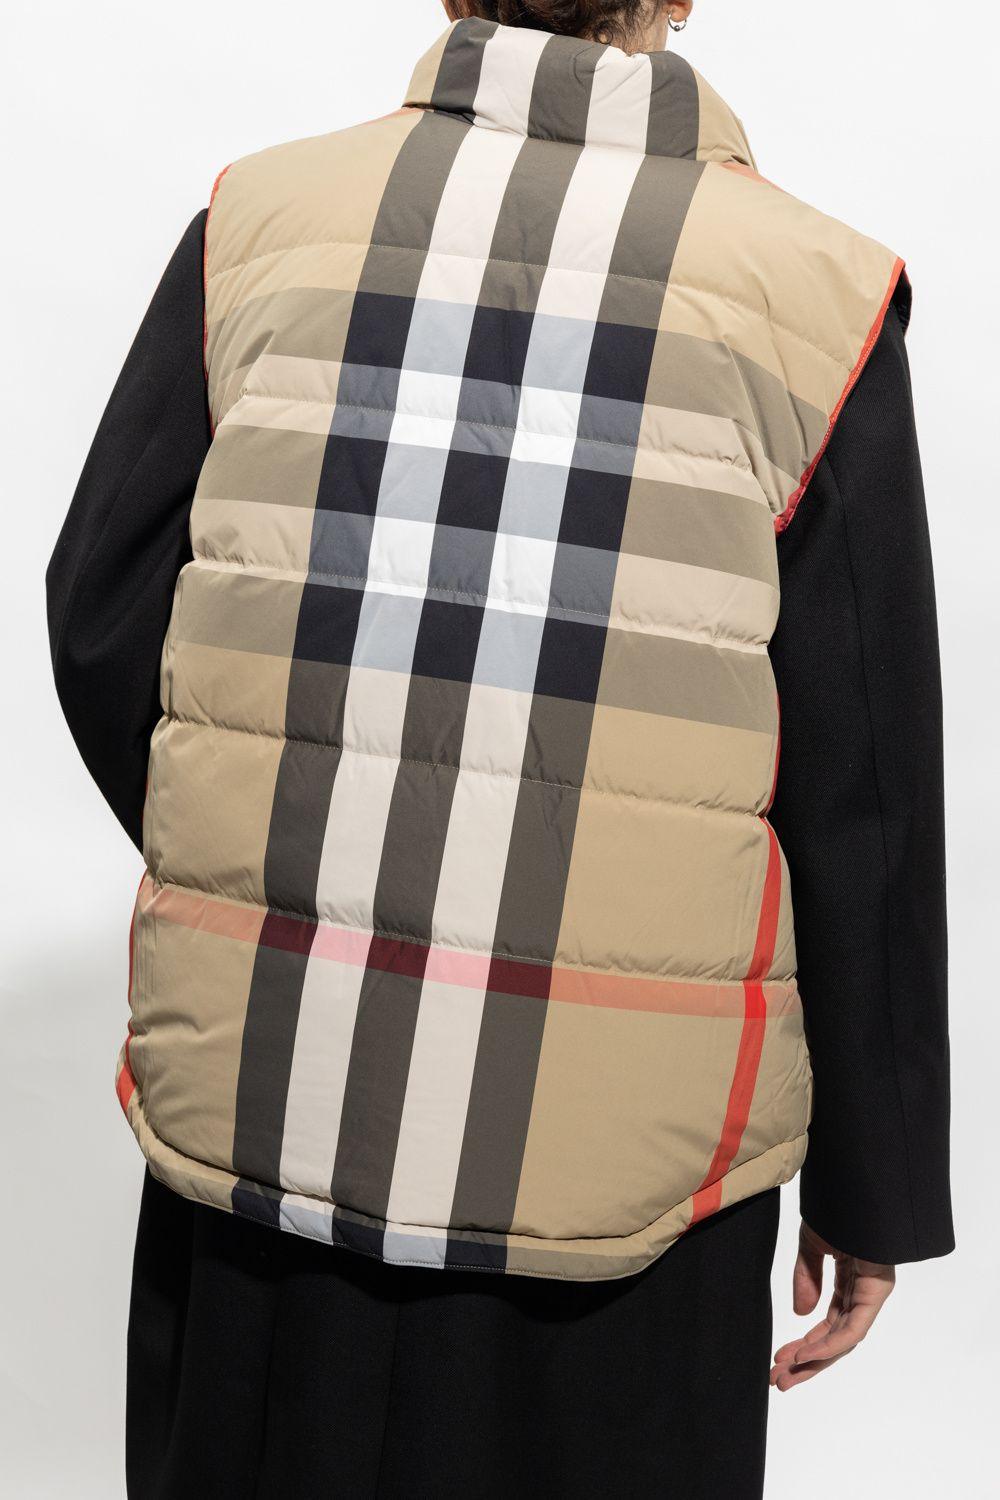 Burberry Men's Beige & Black Polyamide Down Gilet Vest - Designed by Burberry Available to Buy at a Discounted Price on Moon Behind The Hill Online Designer Discount Store